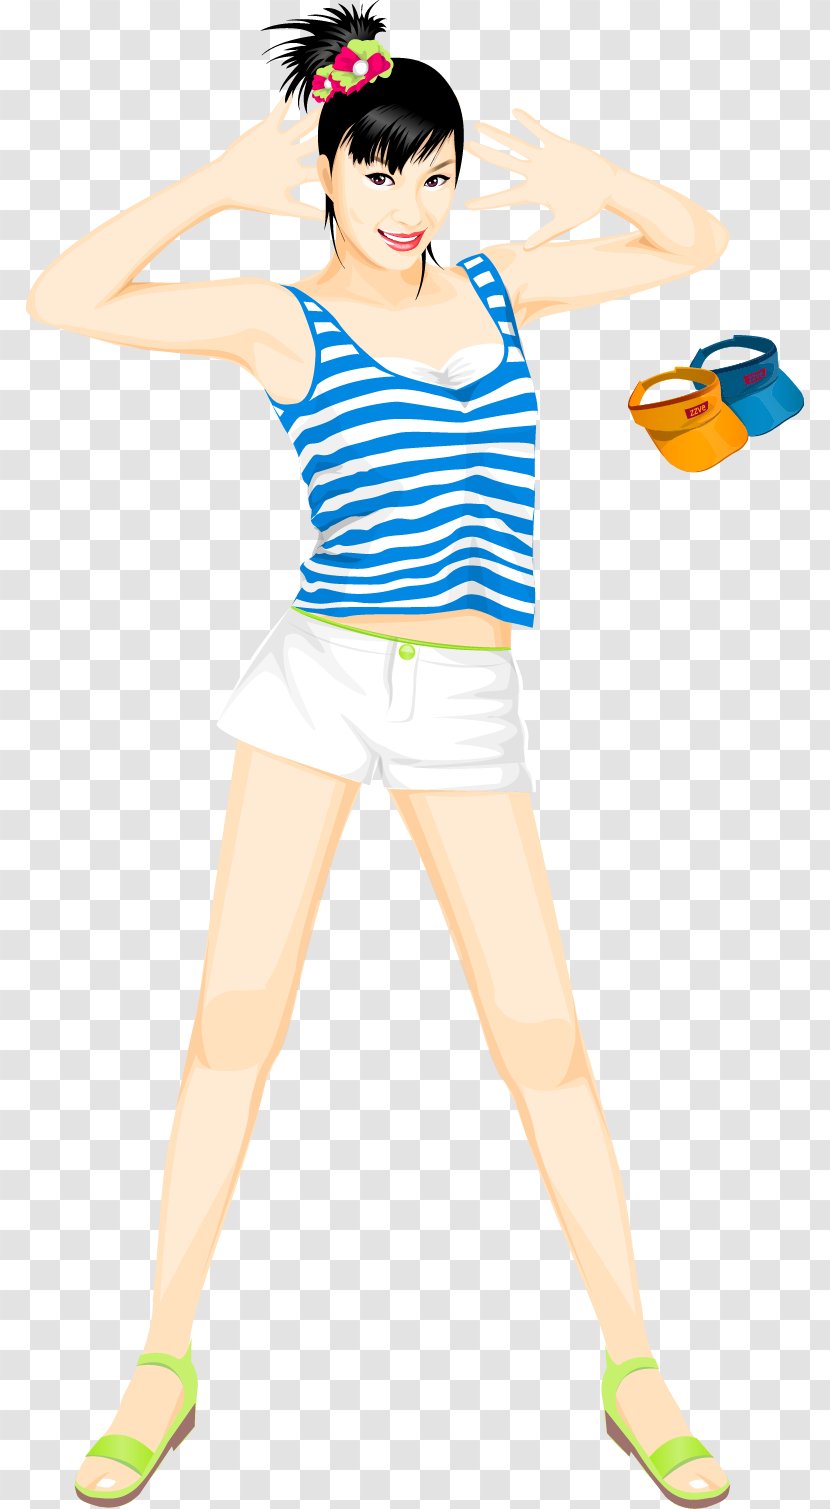 Adobe Illustrator Clip Art - Cartoon - Wearing Shorts And Vest Cool Beauty Vector Material Transparent PNG